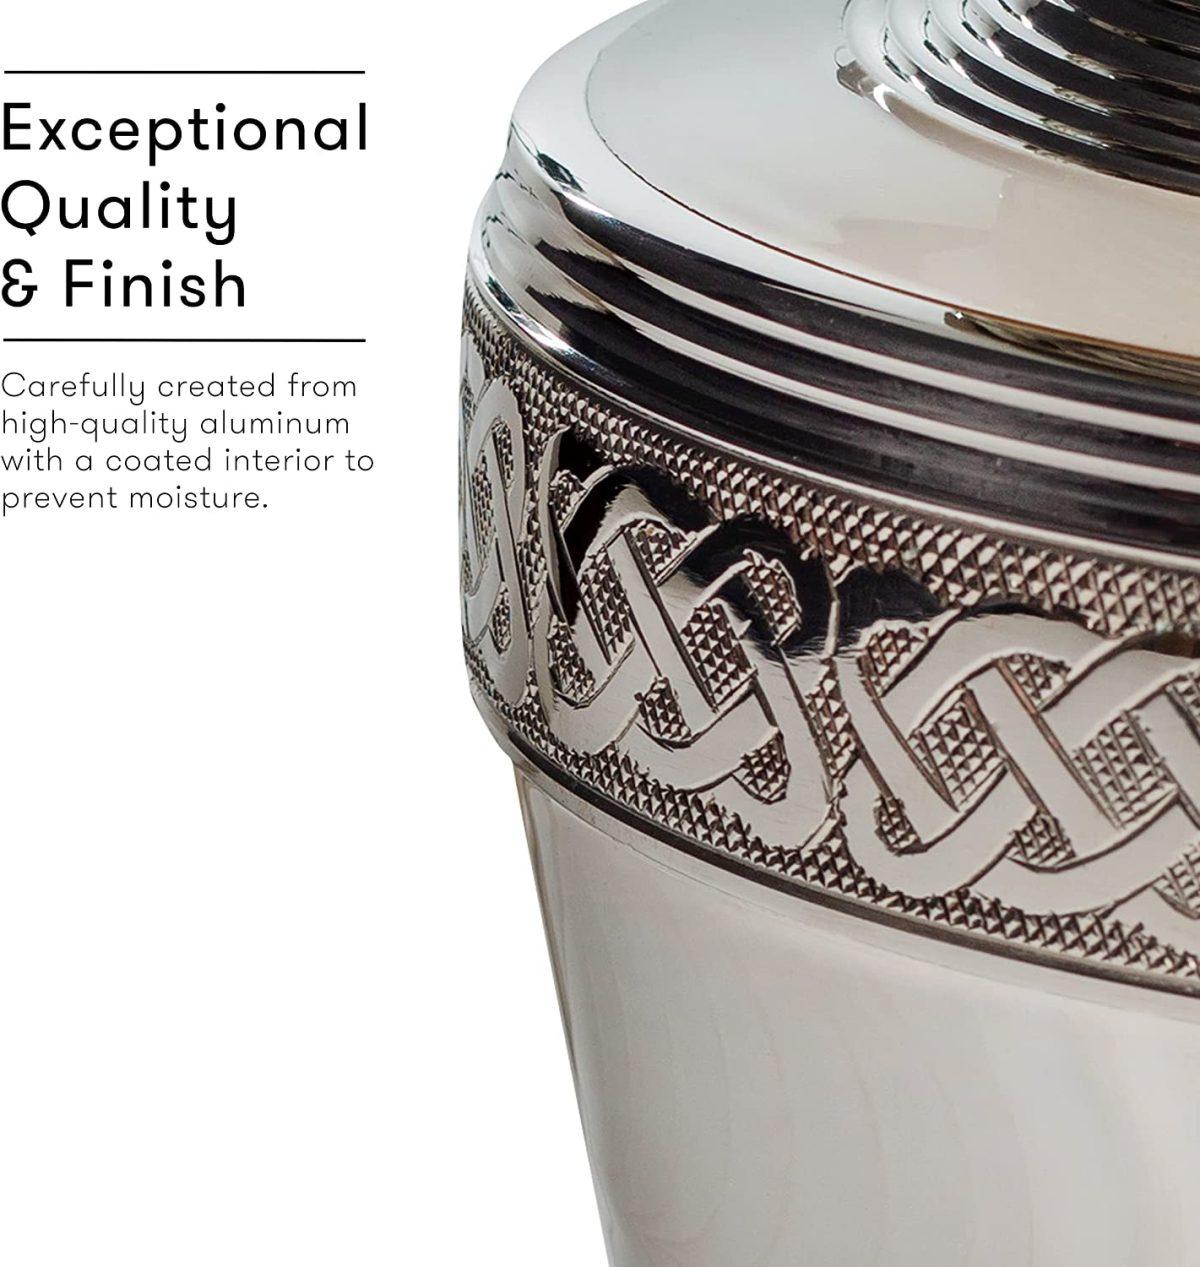 Funeral Cremation Urns